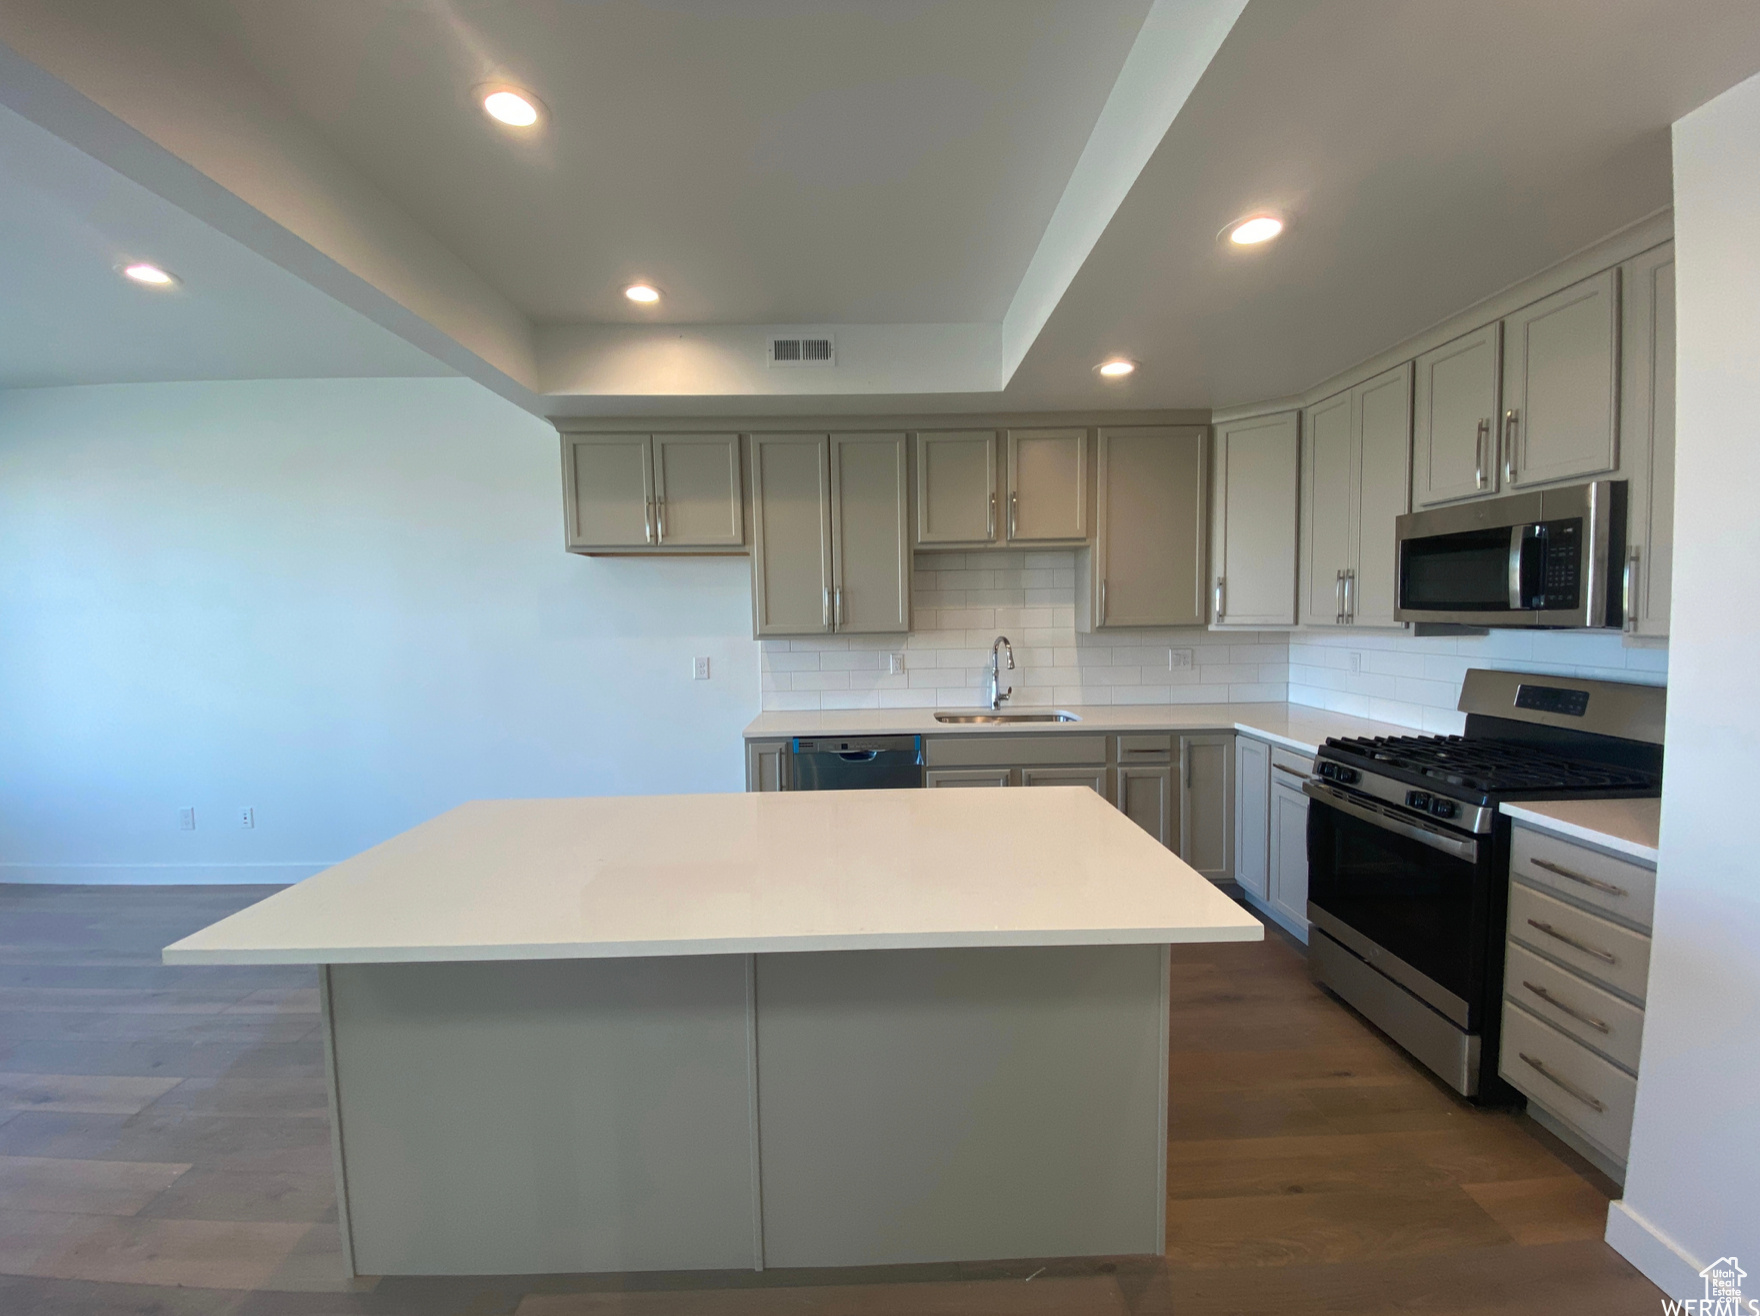 (previously built home as example) featuring appliances with stainless steel finishes, a center island, sink, backsplash, and dark hardwood / wood-style flooring